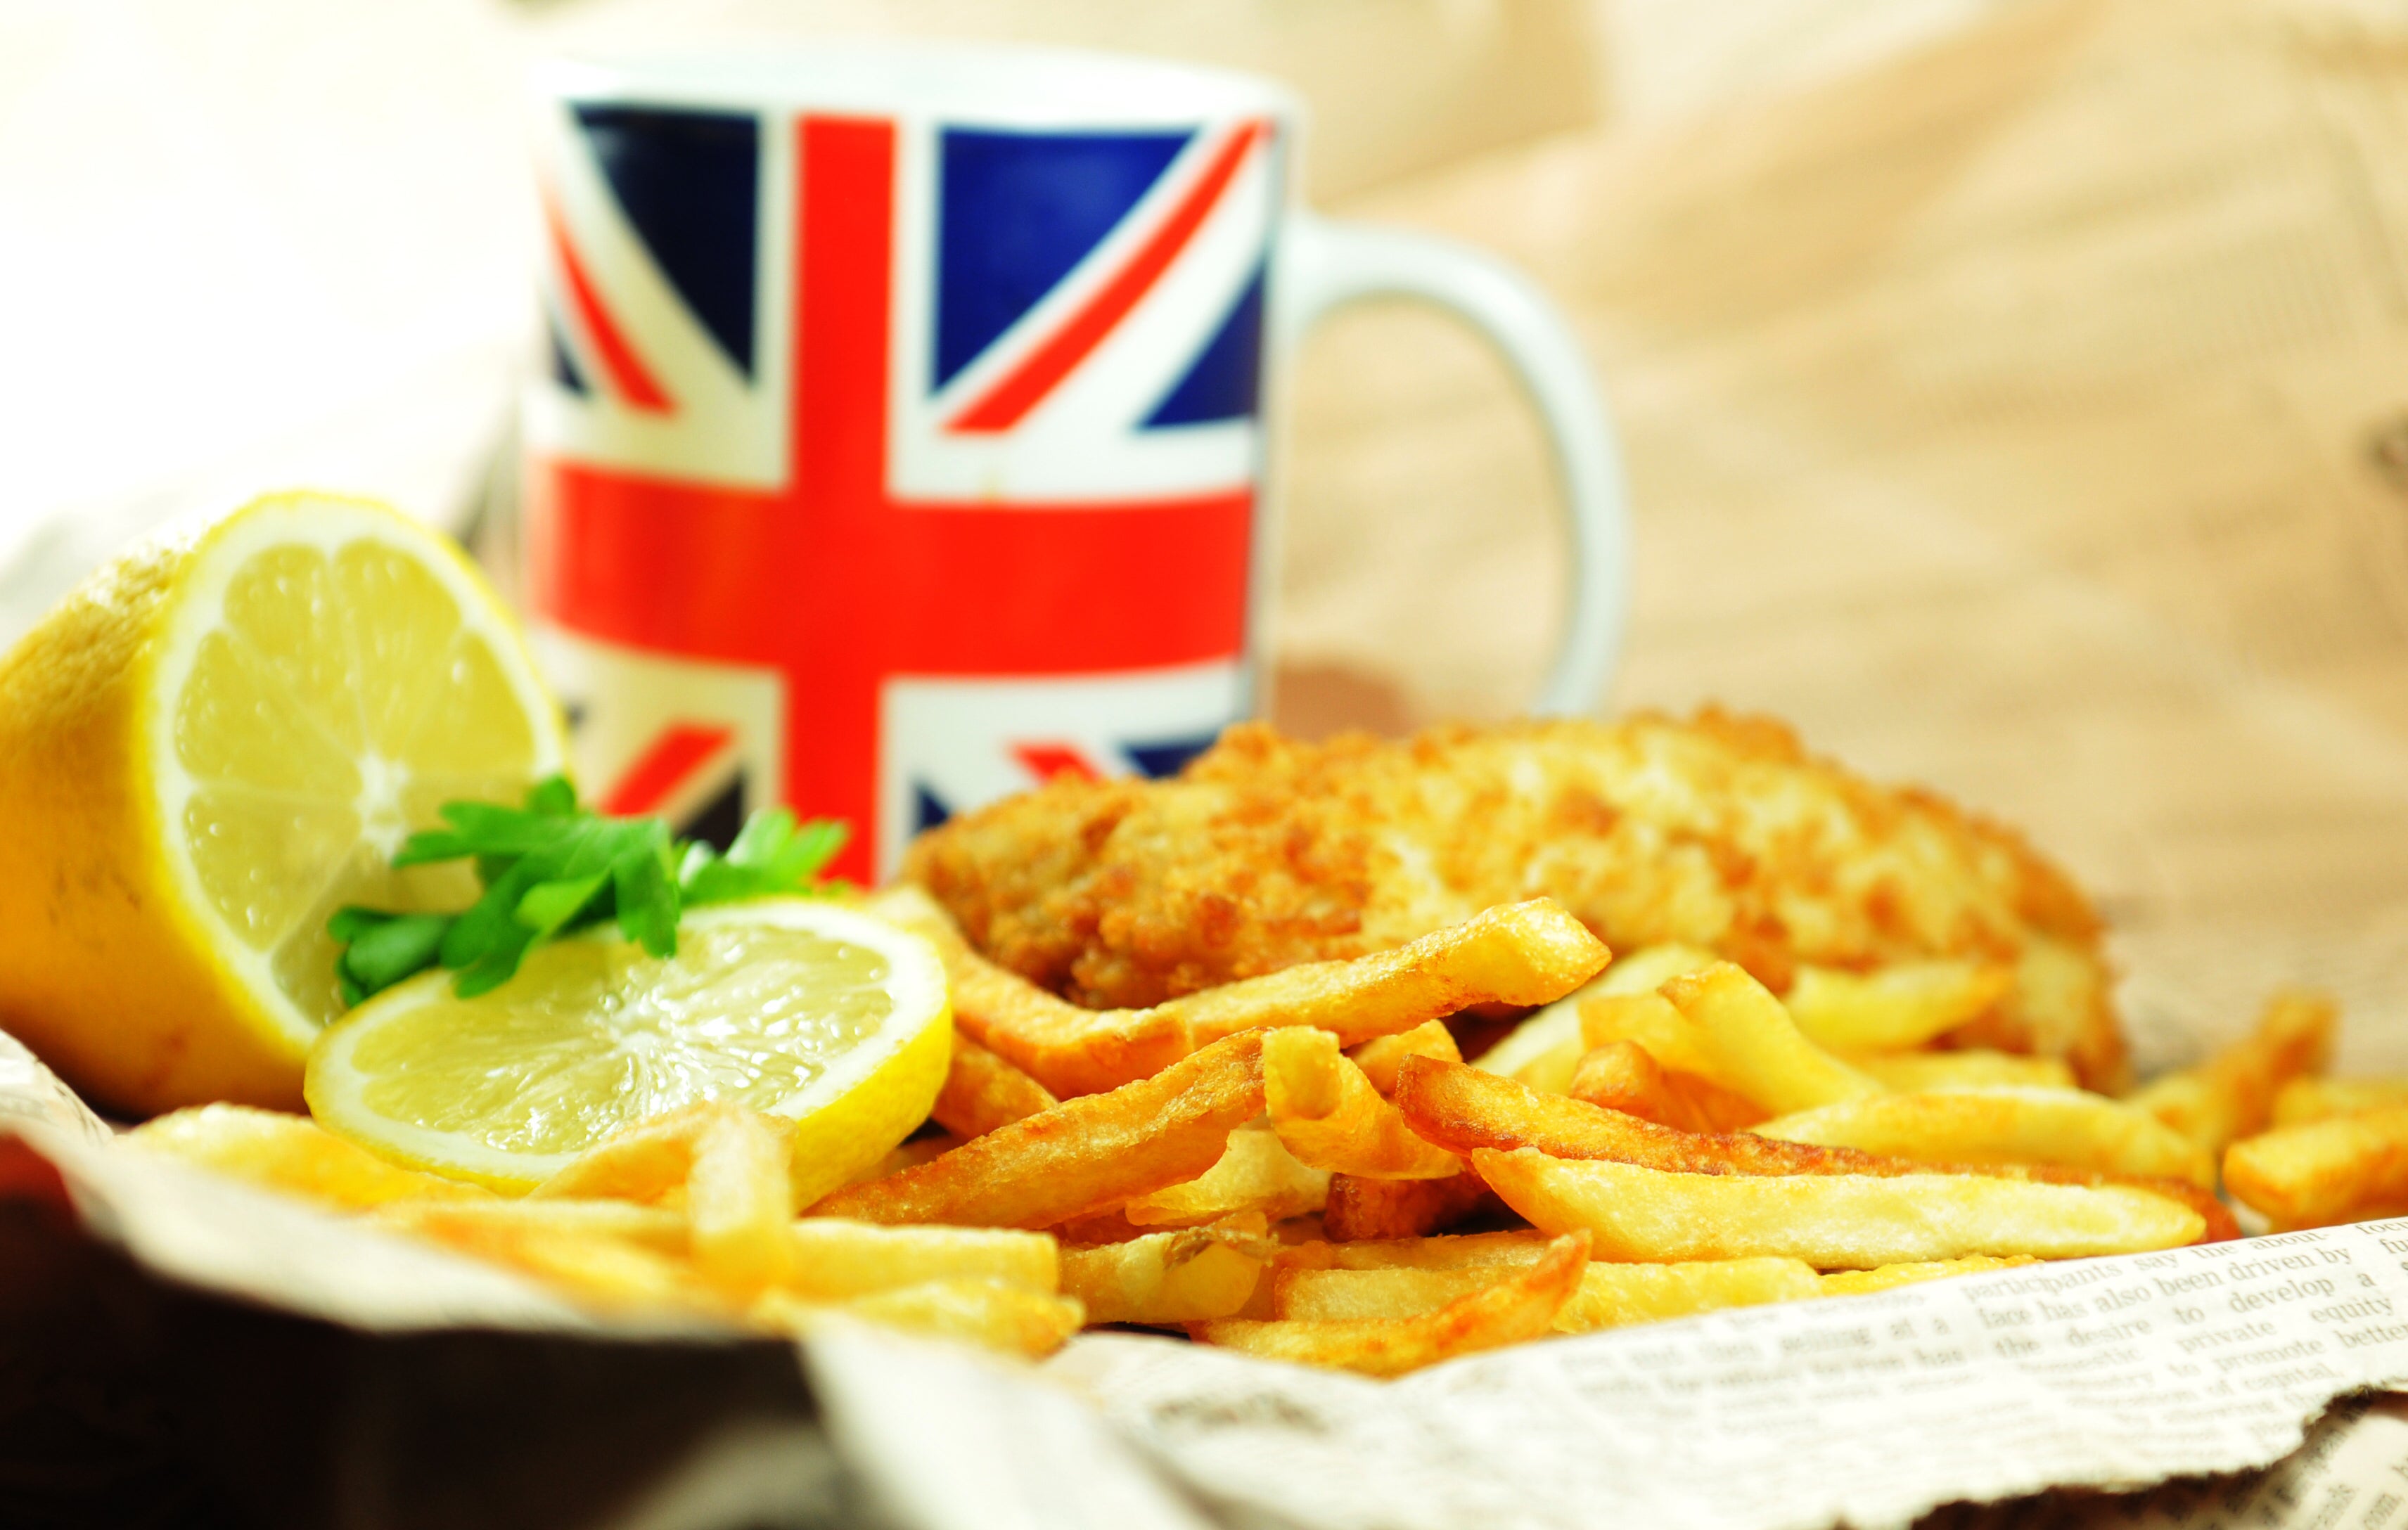 Britons still bemoan the fact that Americans can’t get fish and chips right but our country has a lot more to feel embarrassed about